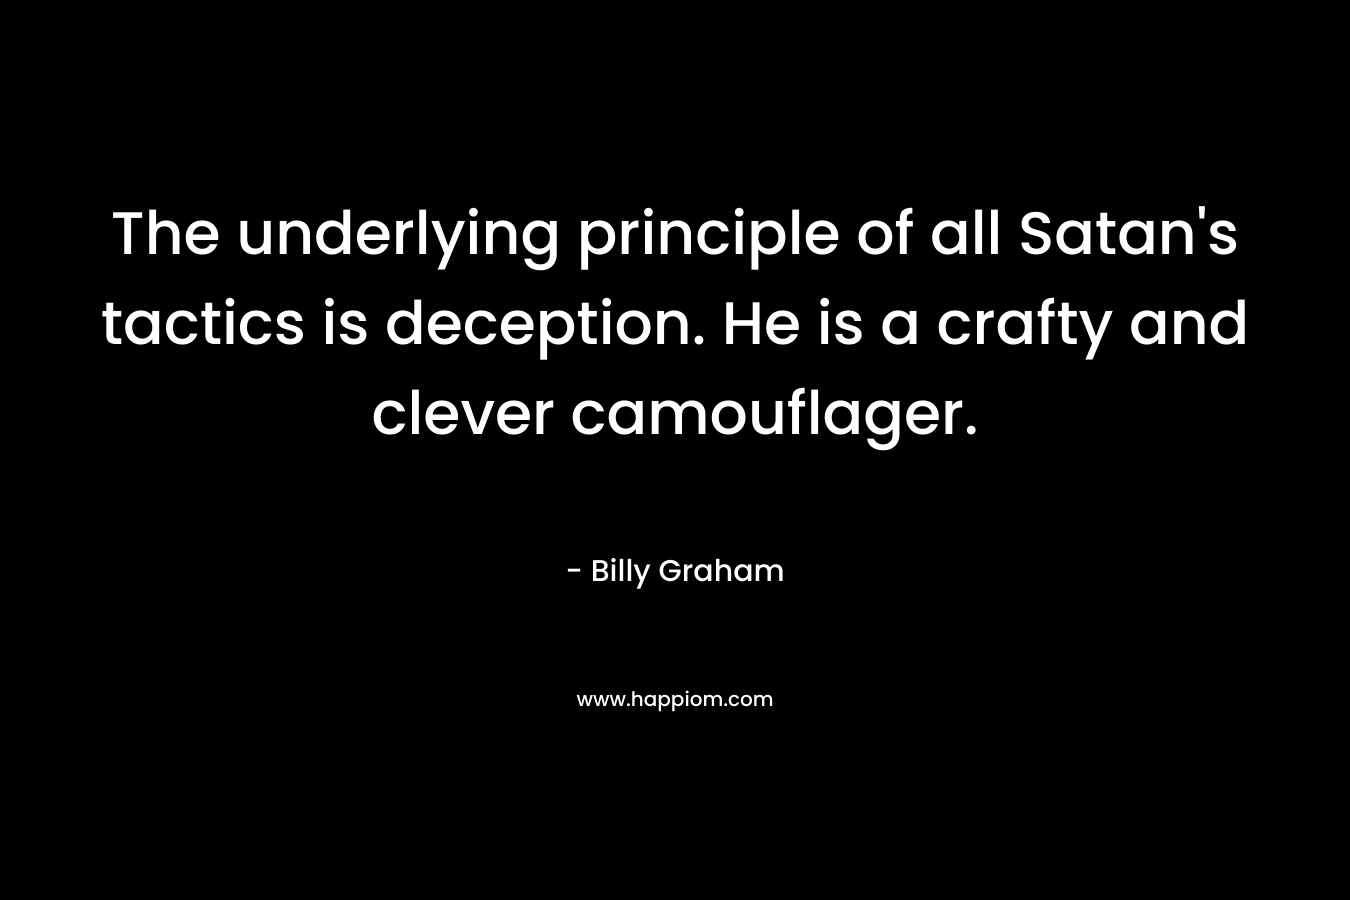 The underlying principle of all Satan's tactics is deception. He is a crafty and clever camouflager.